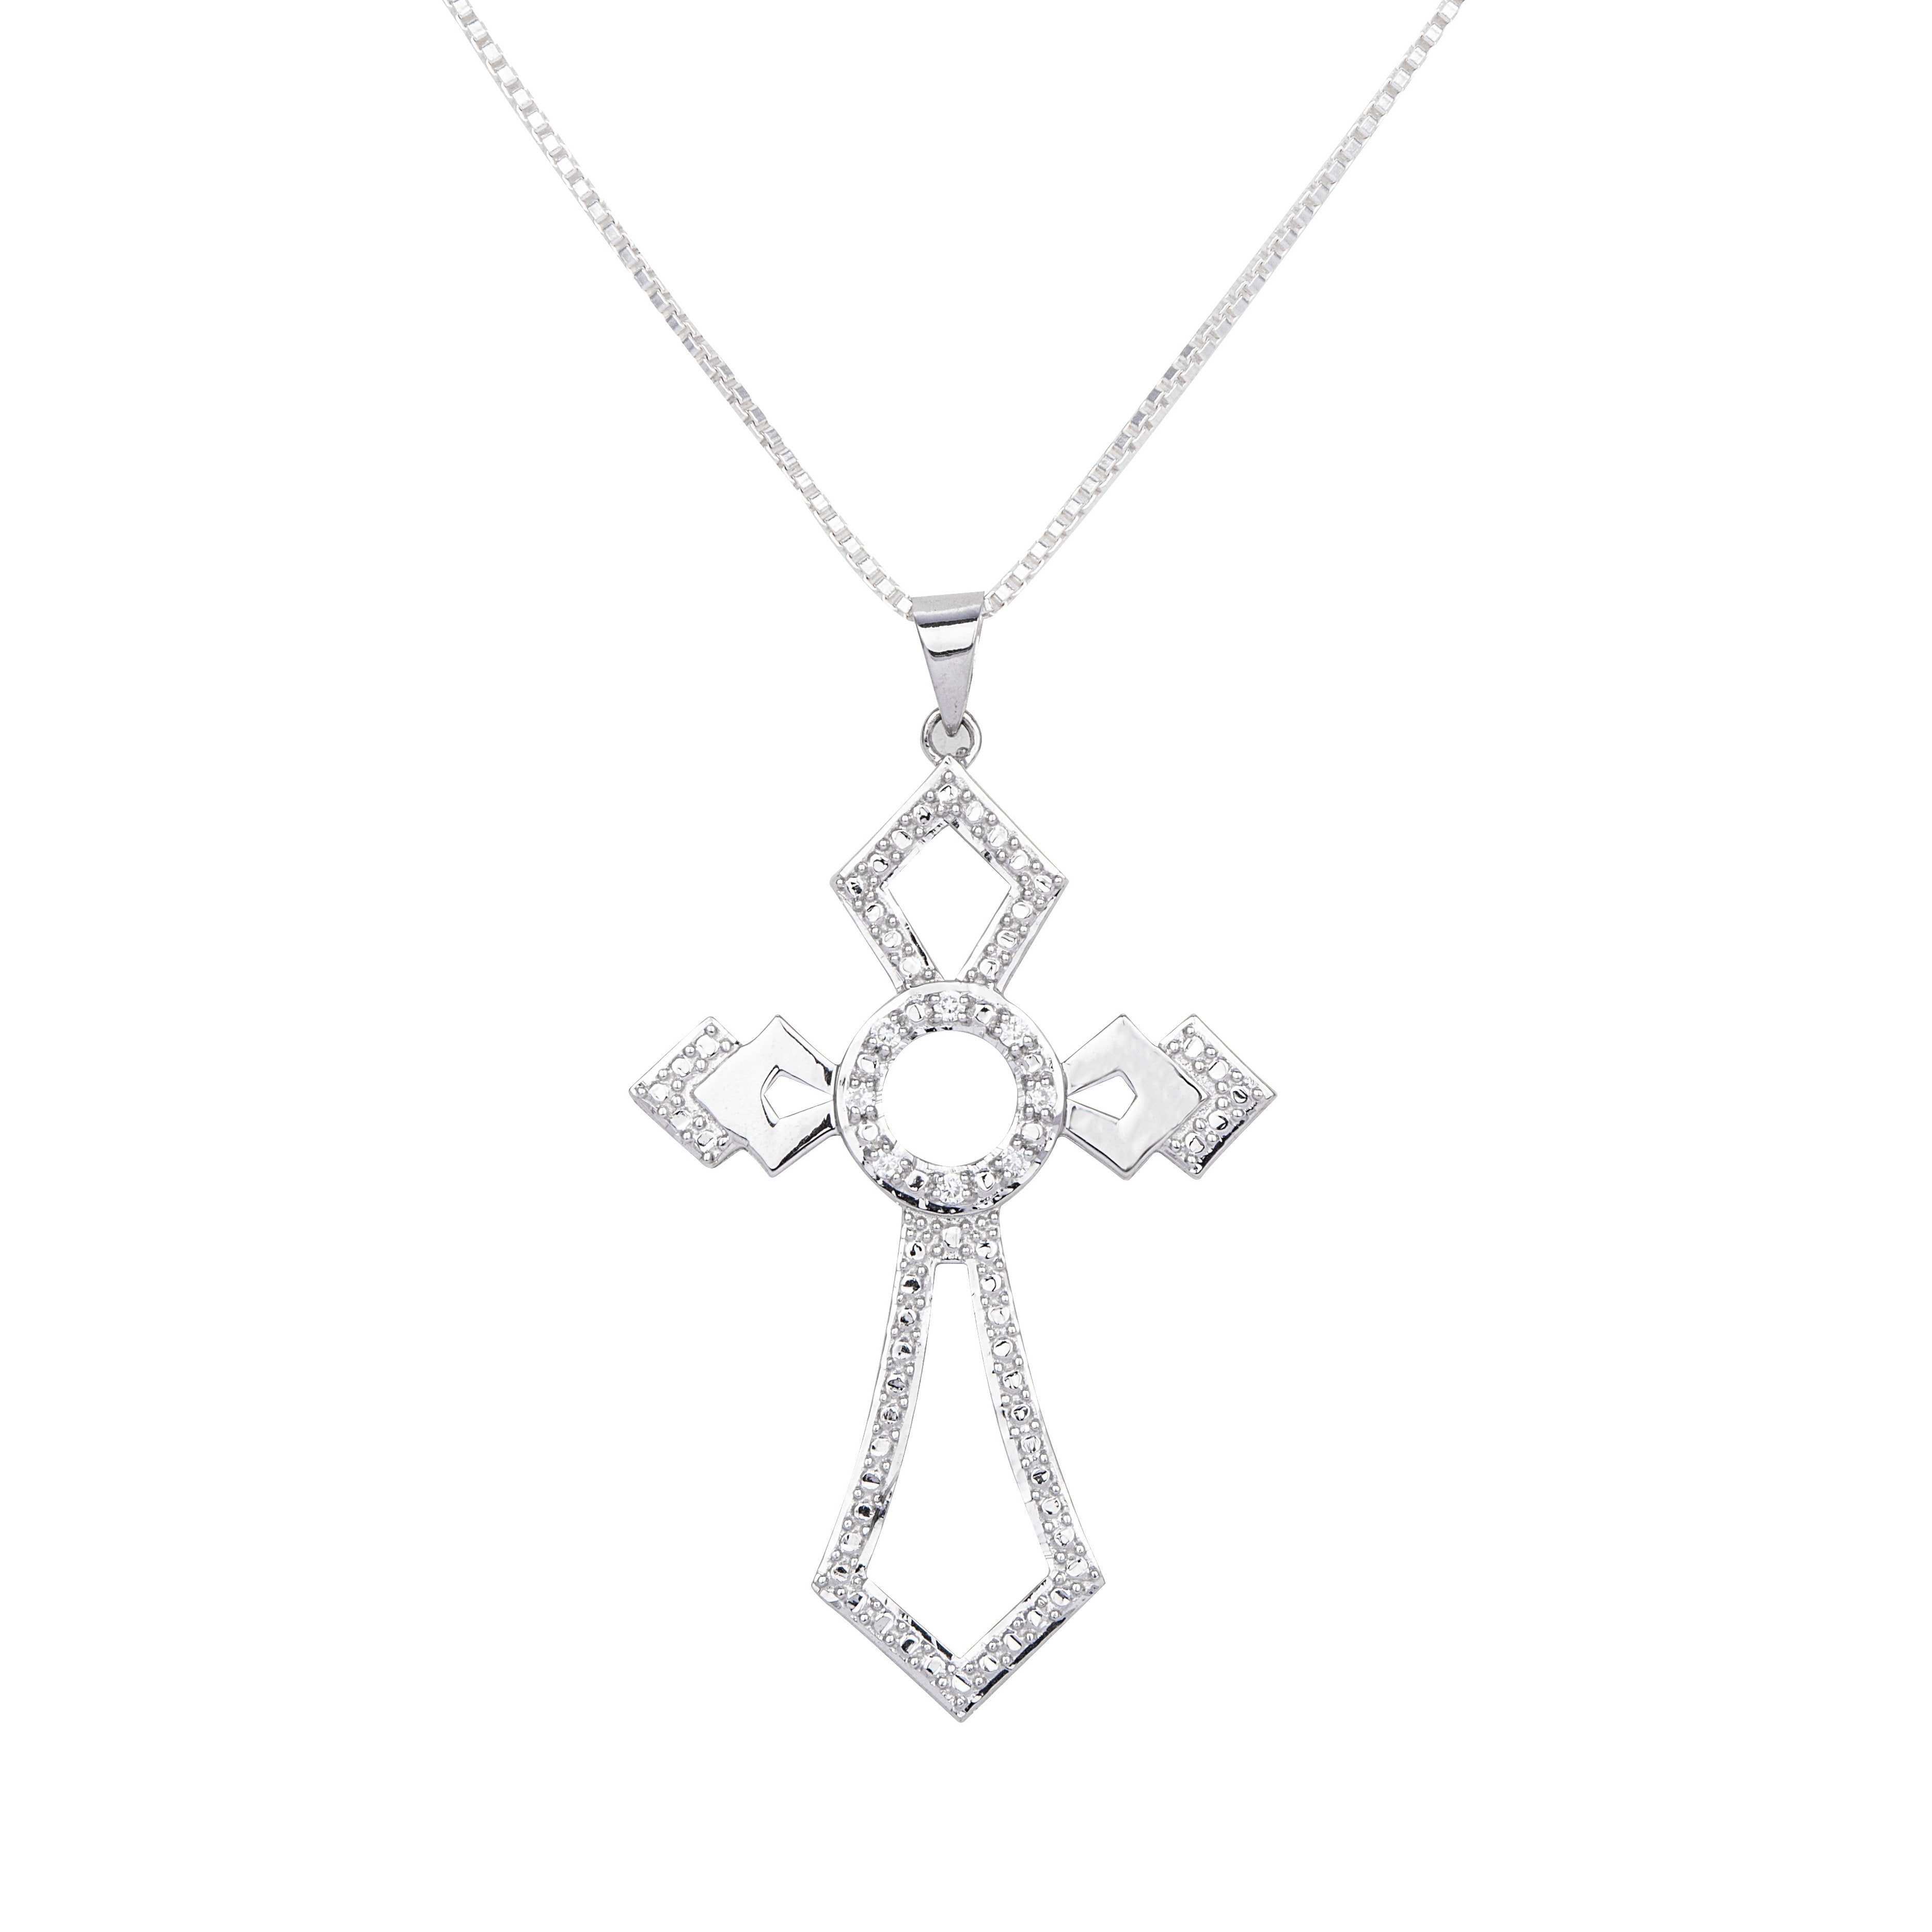 White Gold Color Hollow Cross Pendant Made of 925 Sterling Silver Material with 20 Inch Long Silver Chain